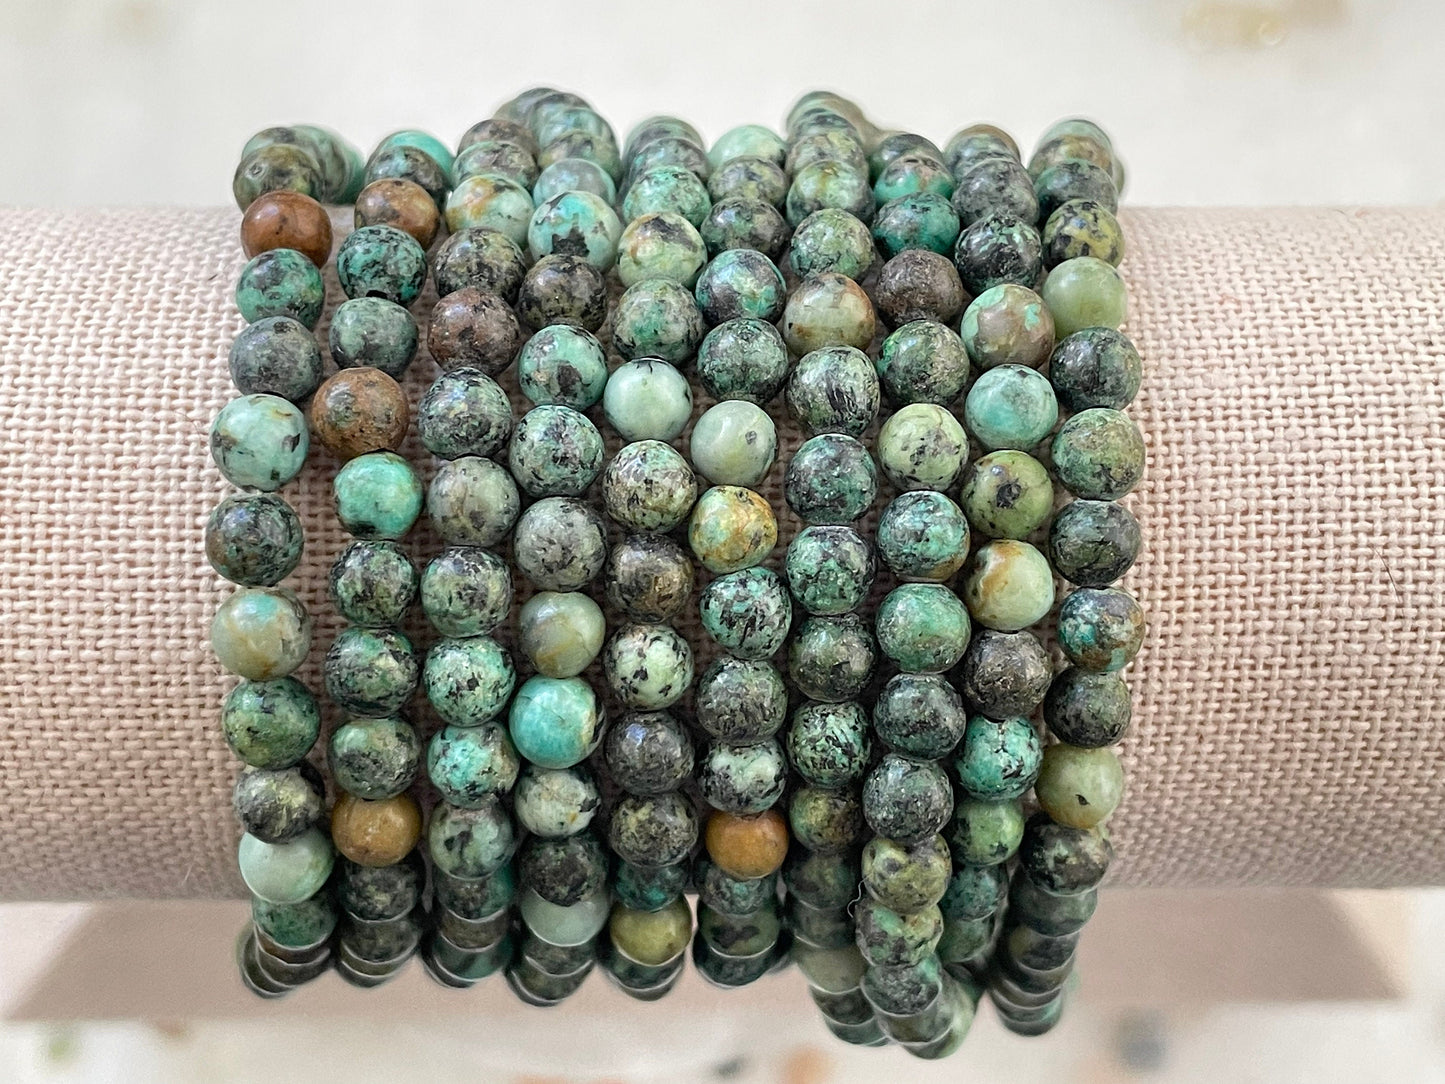 4mm Gemstone Beads Bracelet in African Turquoise: Protection Purification & Transformation